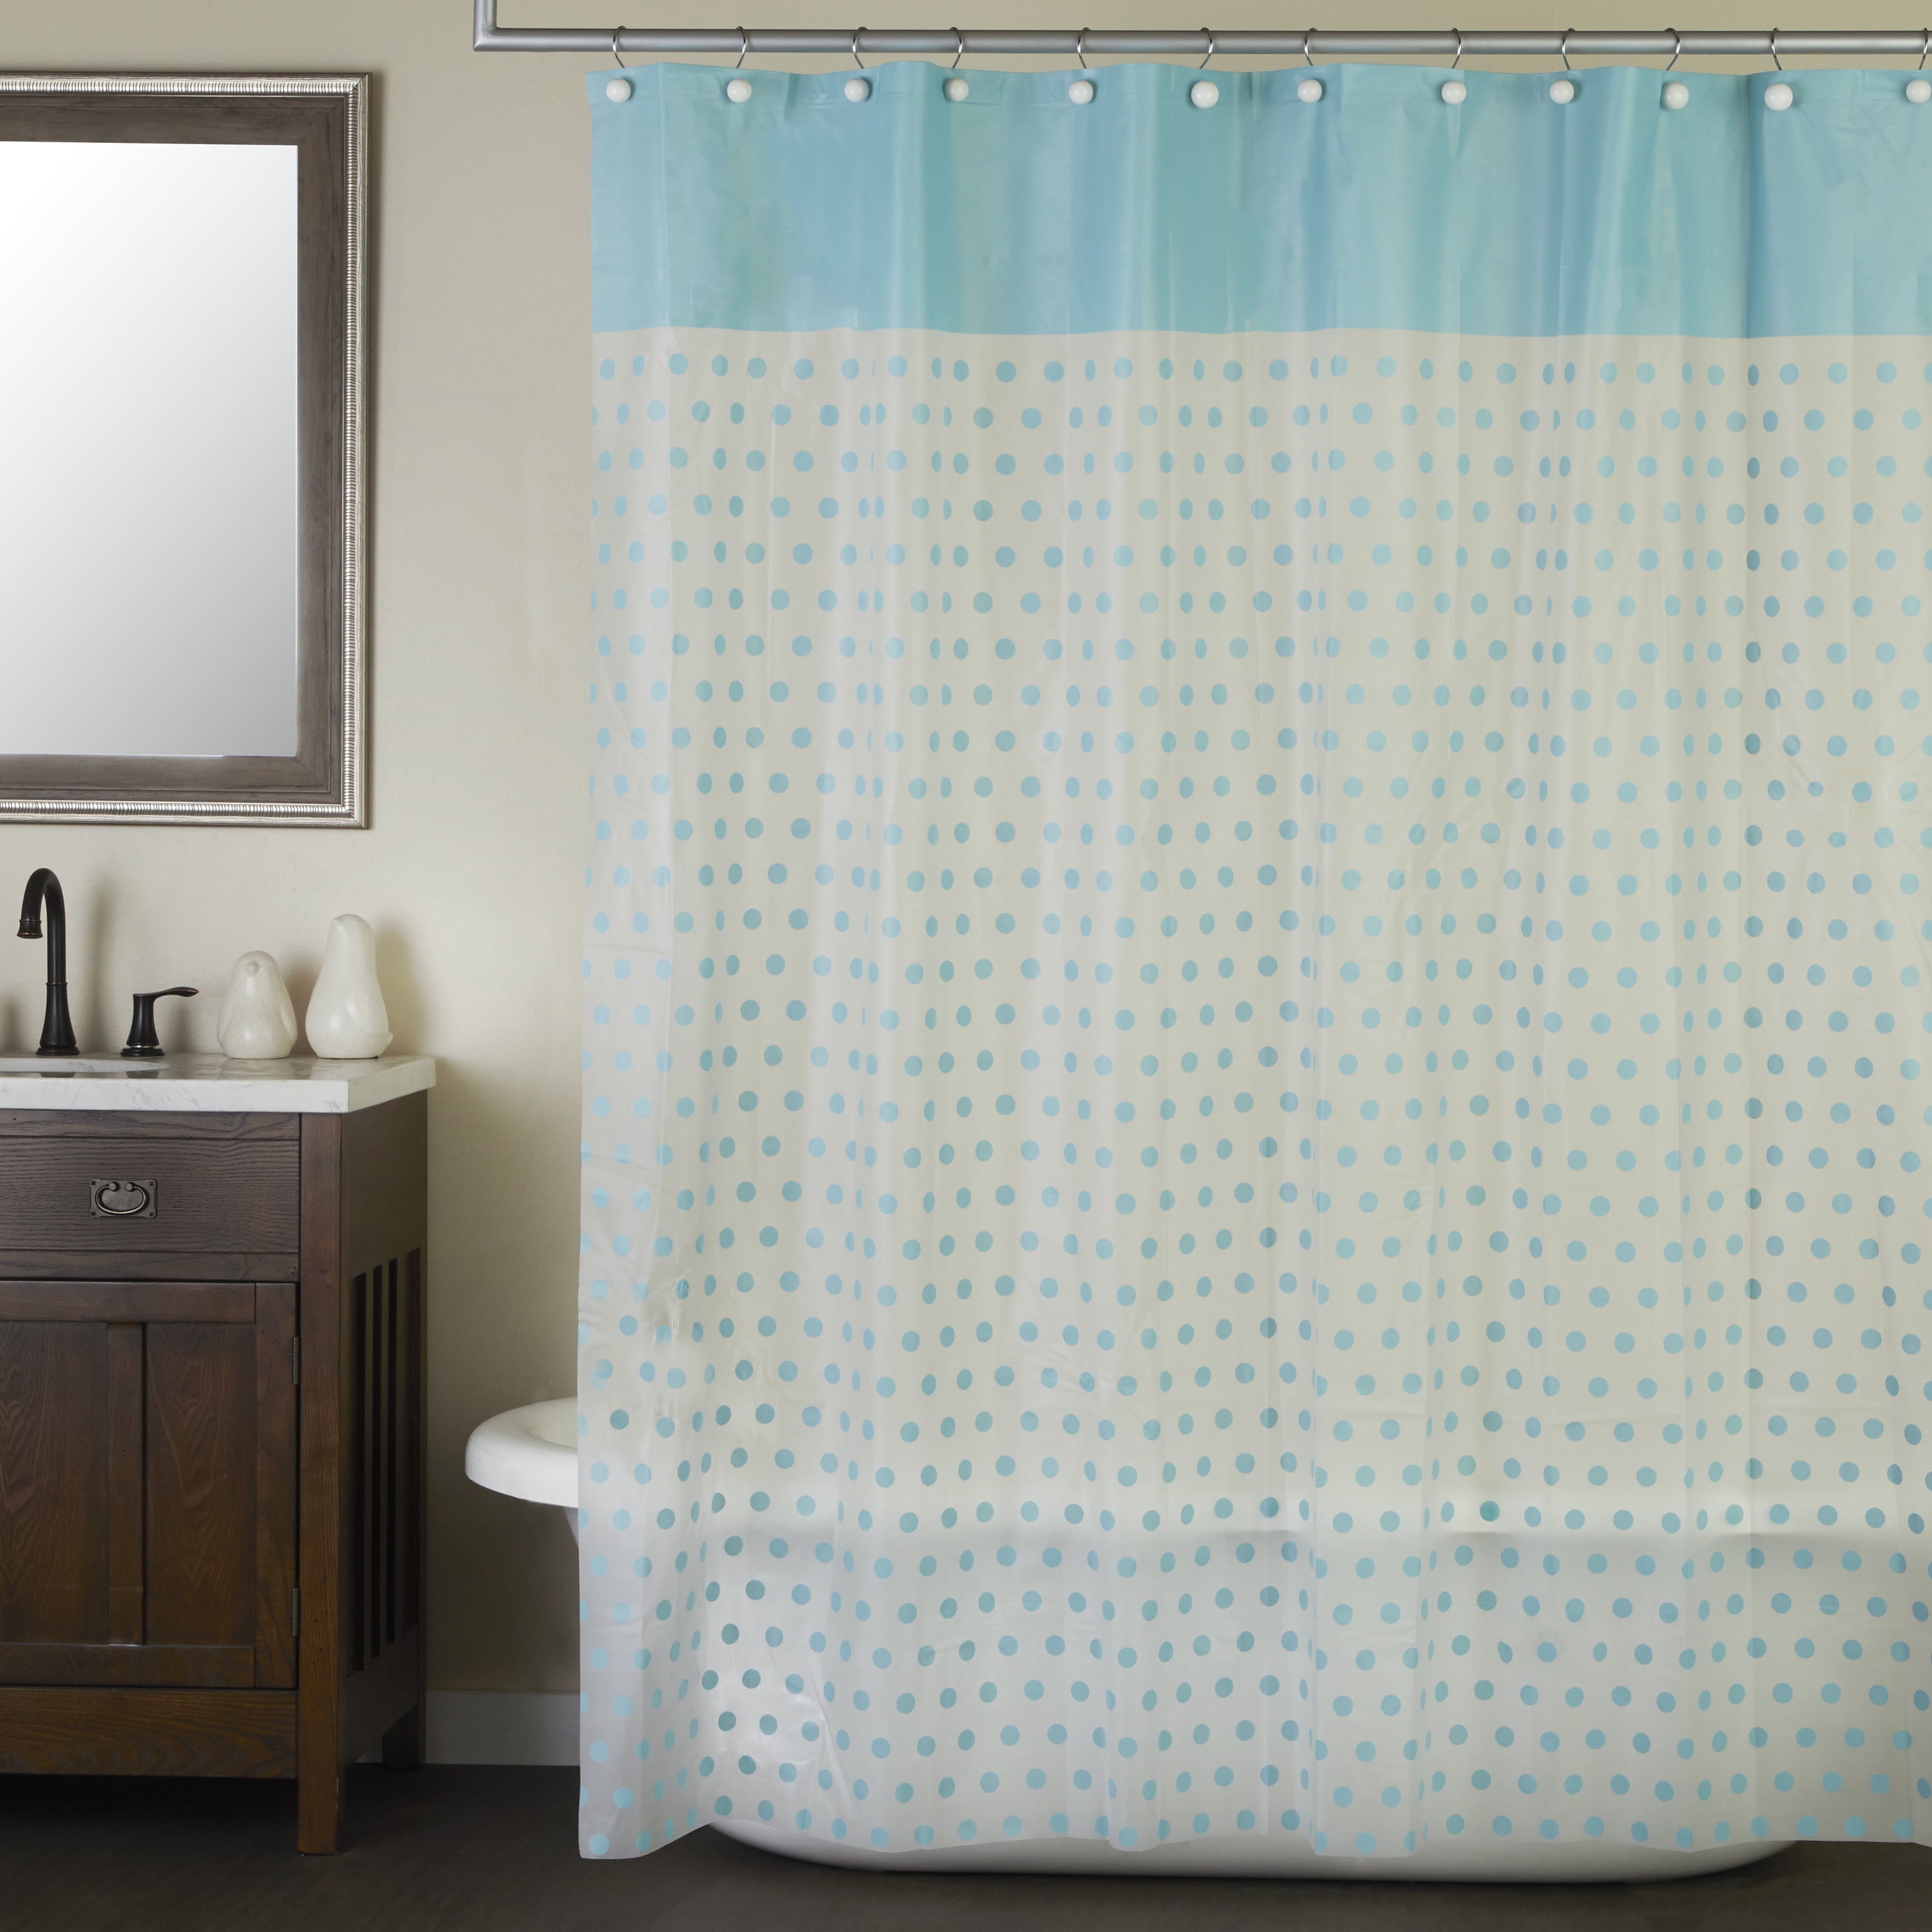 Details about   Thinking Playing Chess 3D Shower Curtain Waterproof Fabric Bathroom Decoration 